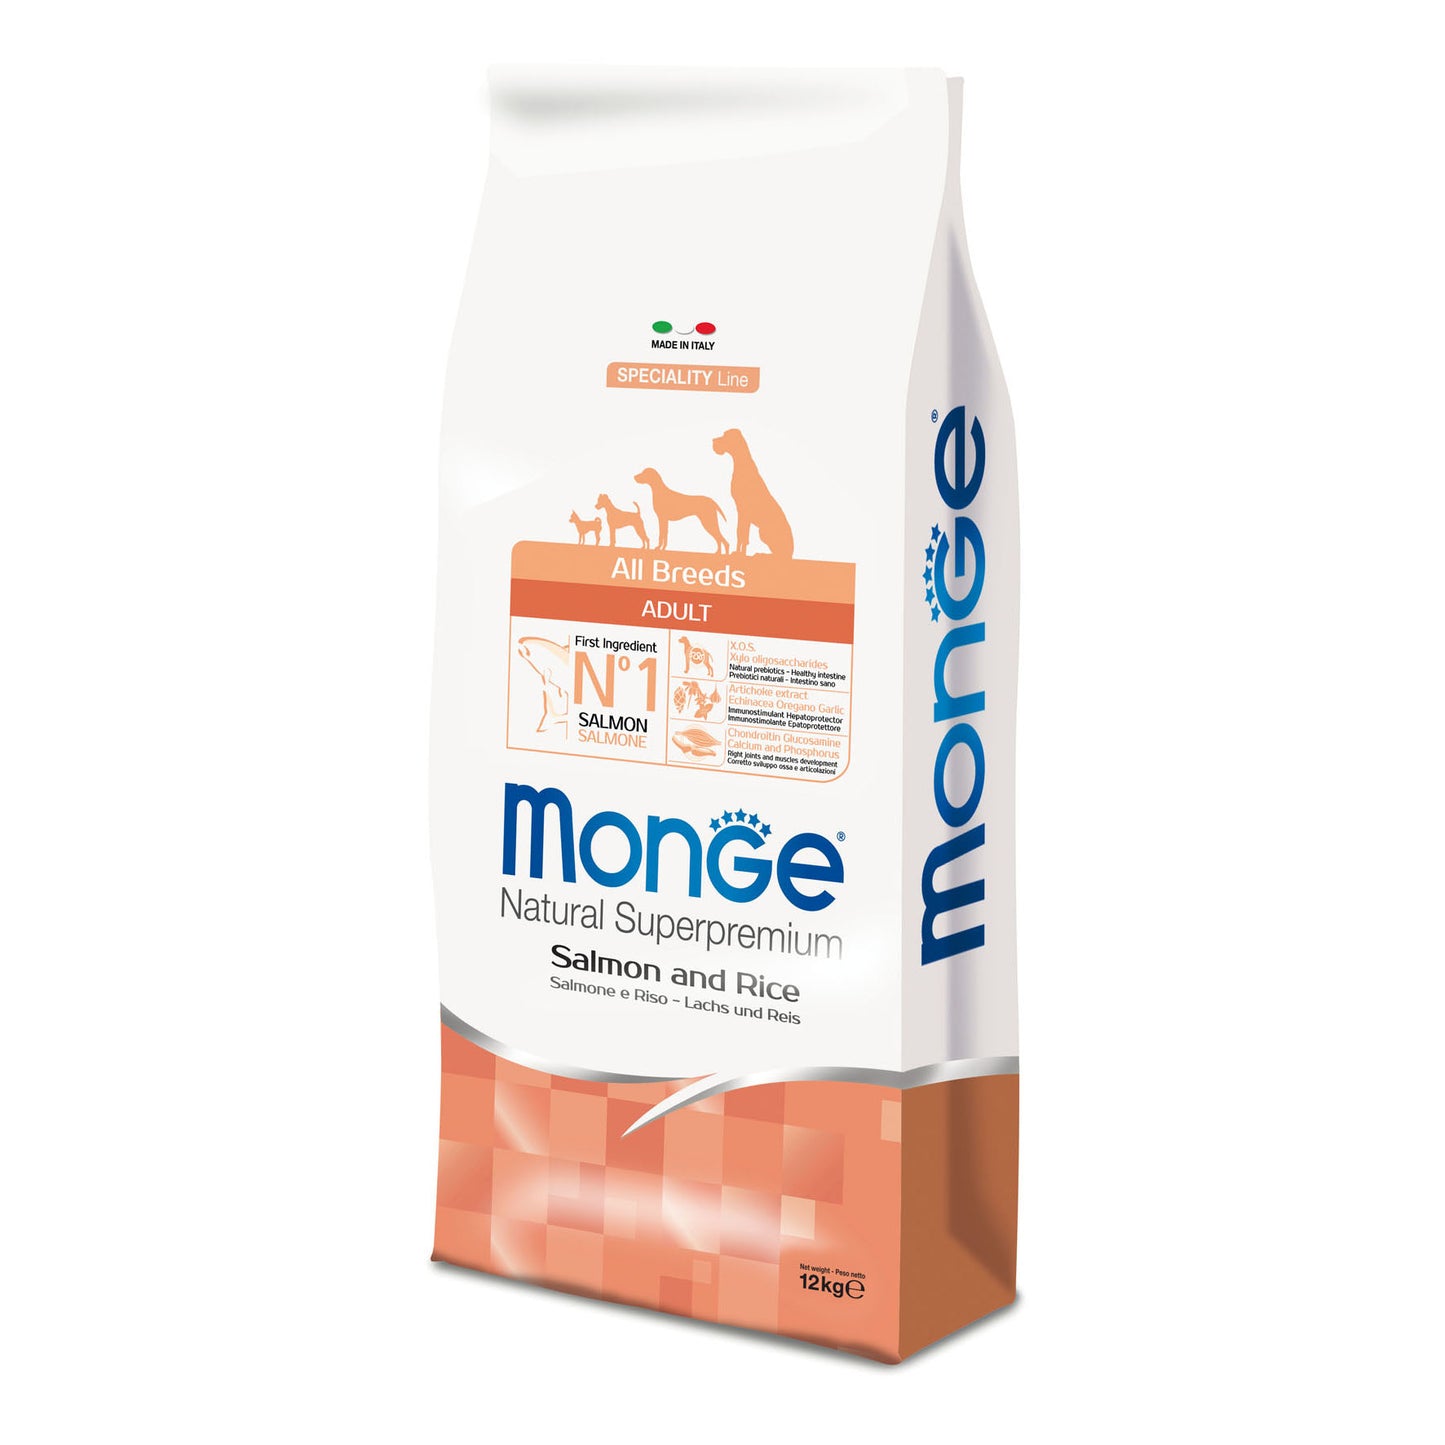 Monge Dog - SPECIALITY Line - Monoprotein - Adult ALL BREEDS Salmon